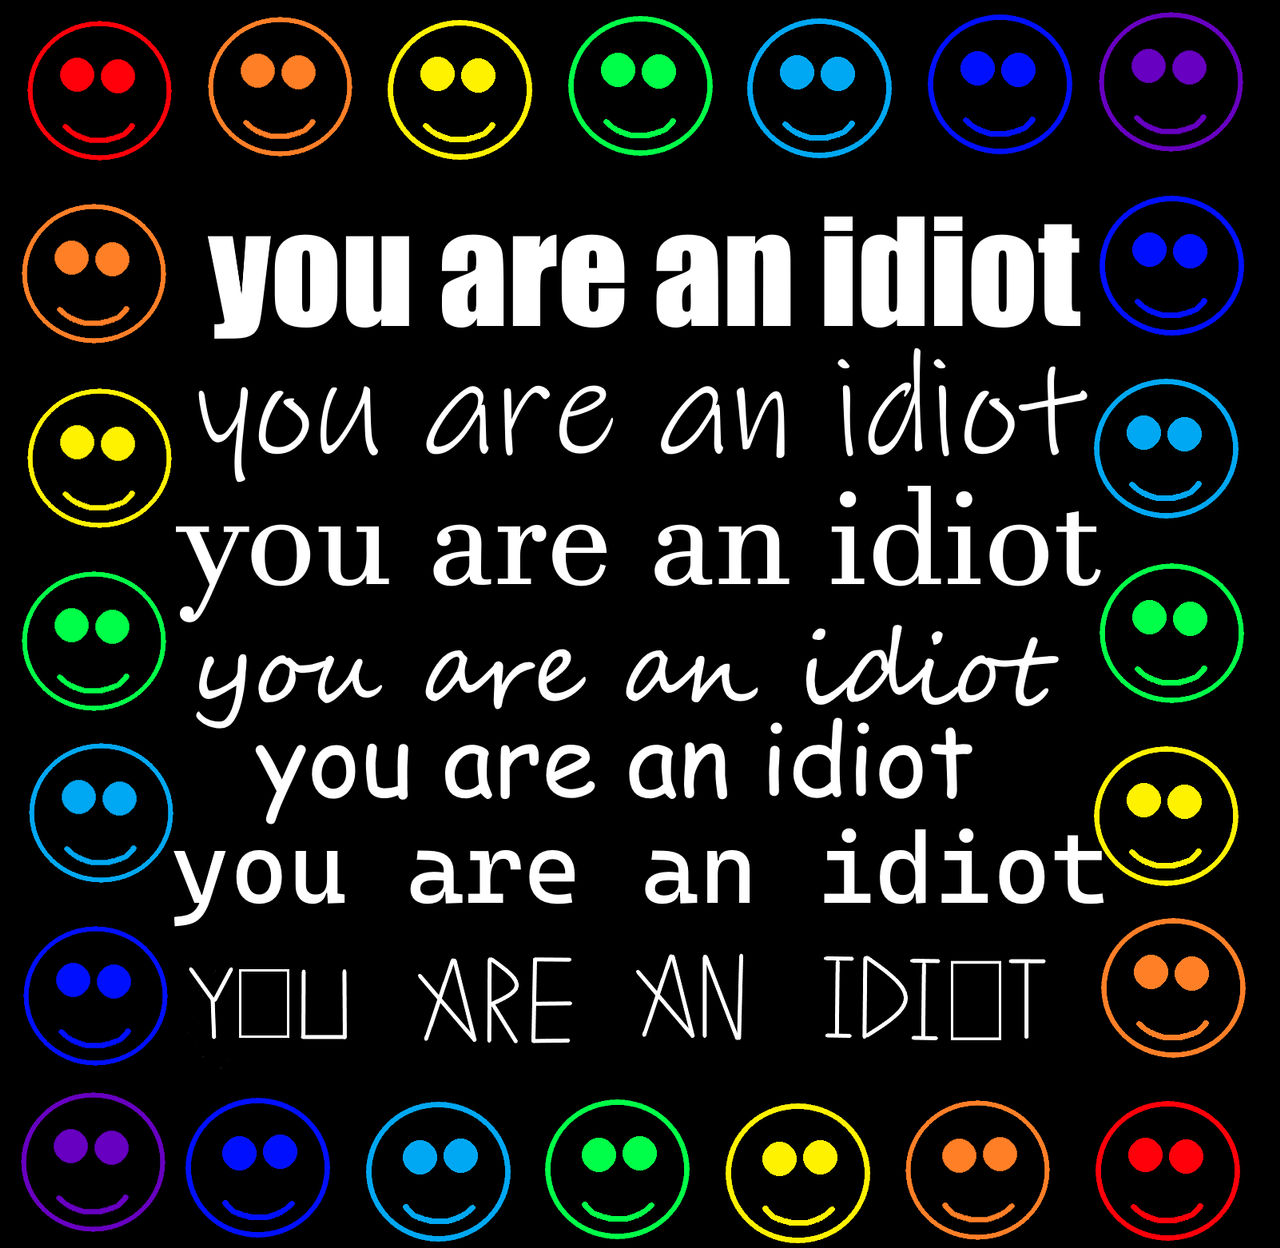 Pixilart - You Are An Idiot (virus) by c0rpsecl0wn